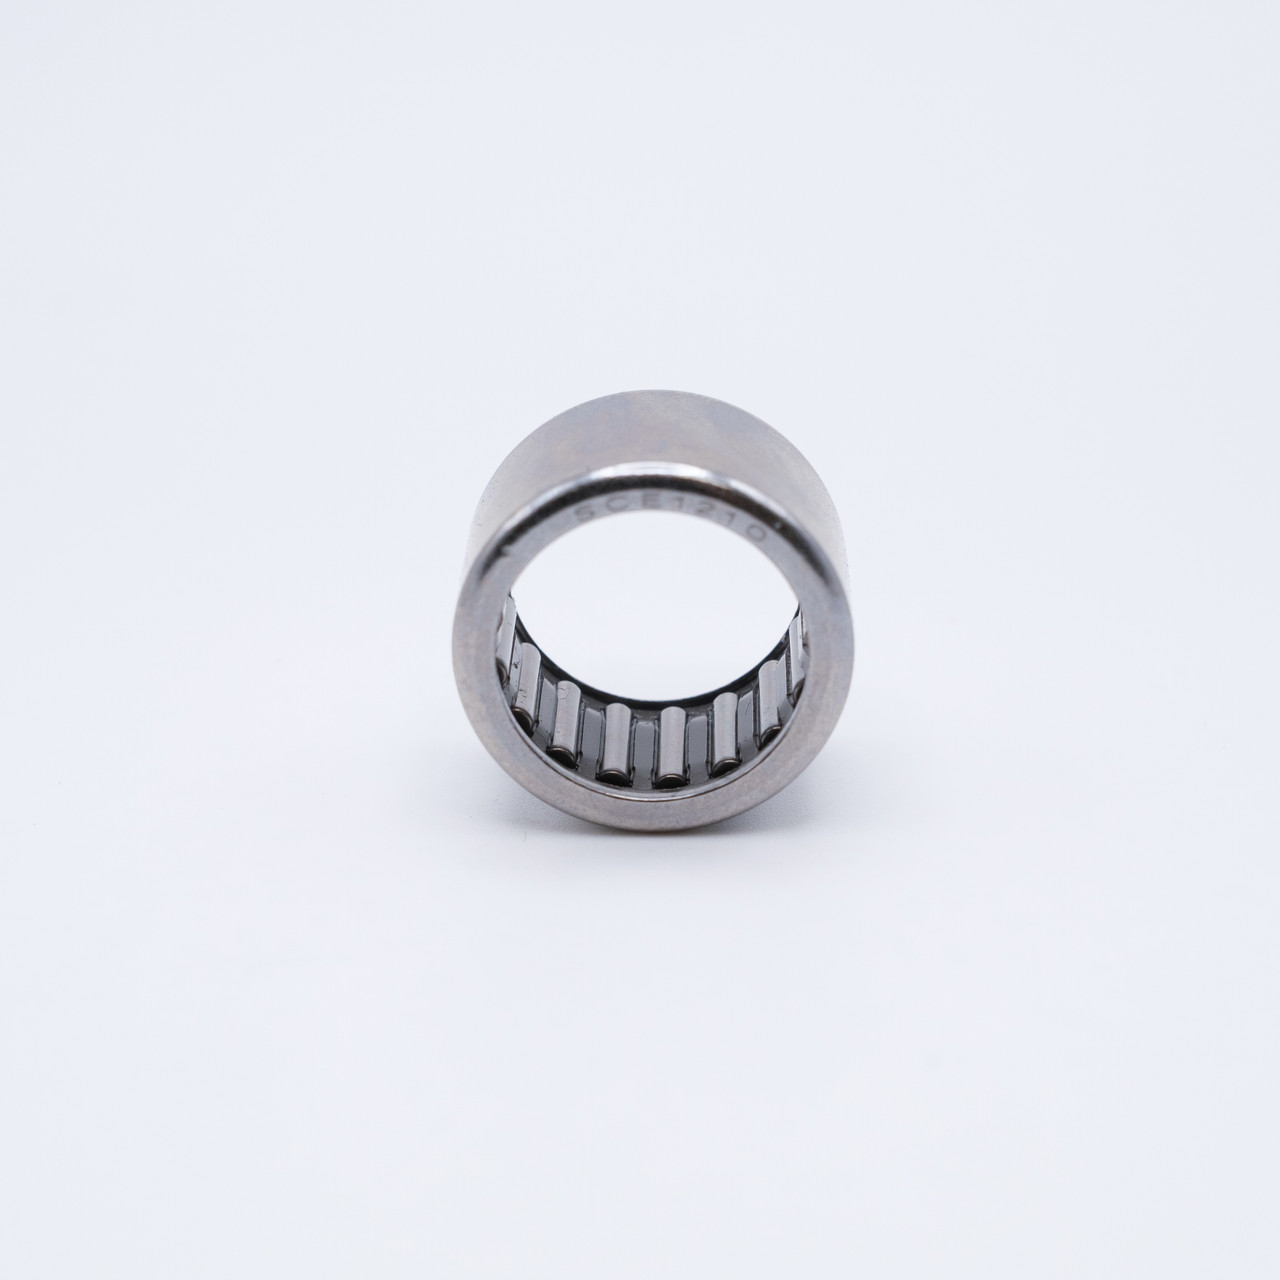 J1620 Needle Roller Bearing 1x1-1/4x1-1/4 Front View